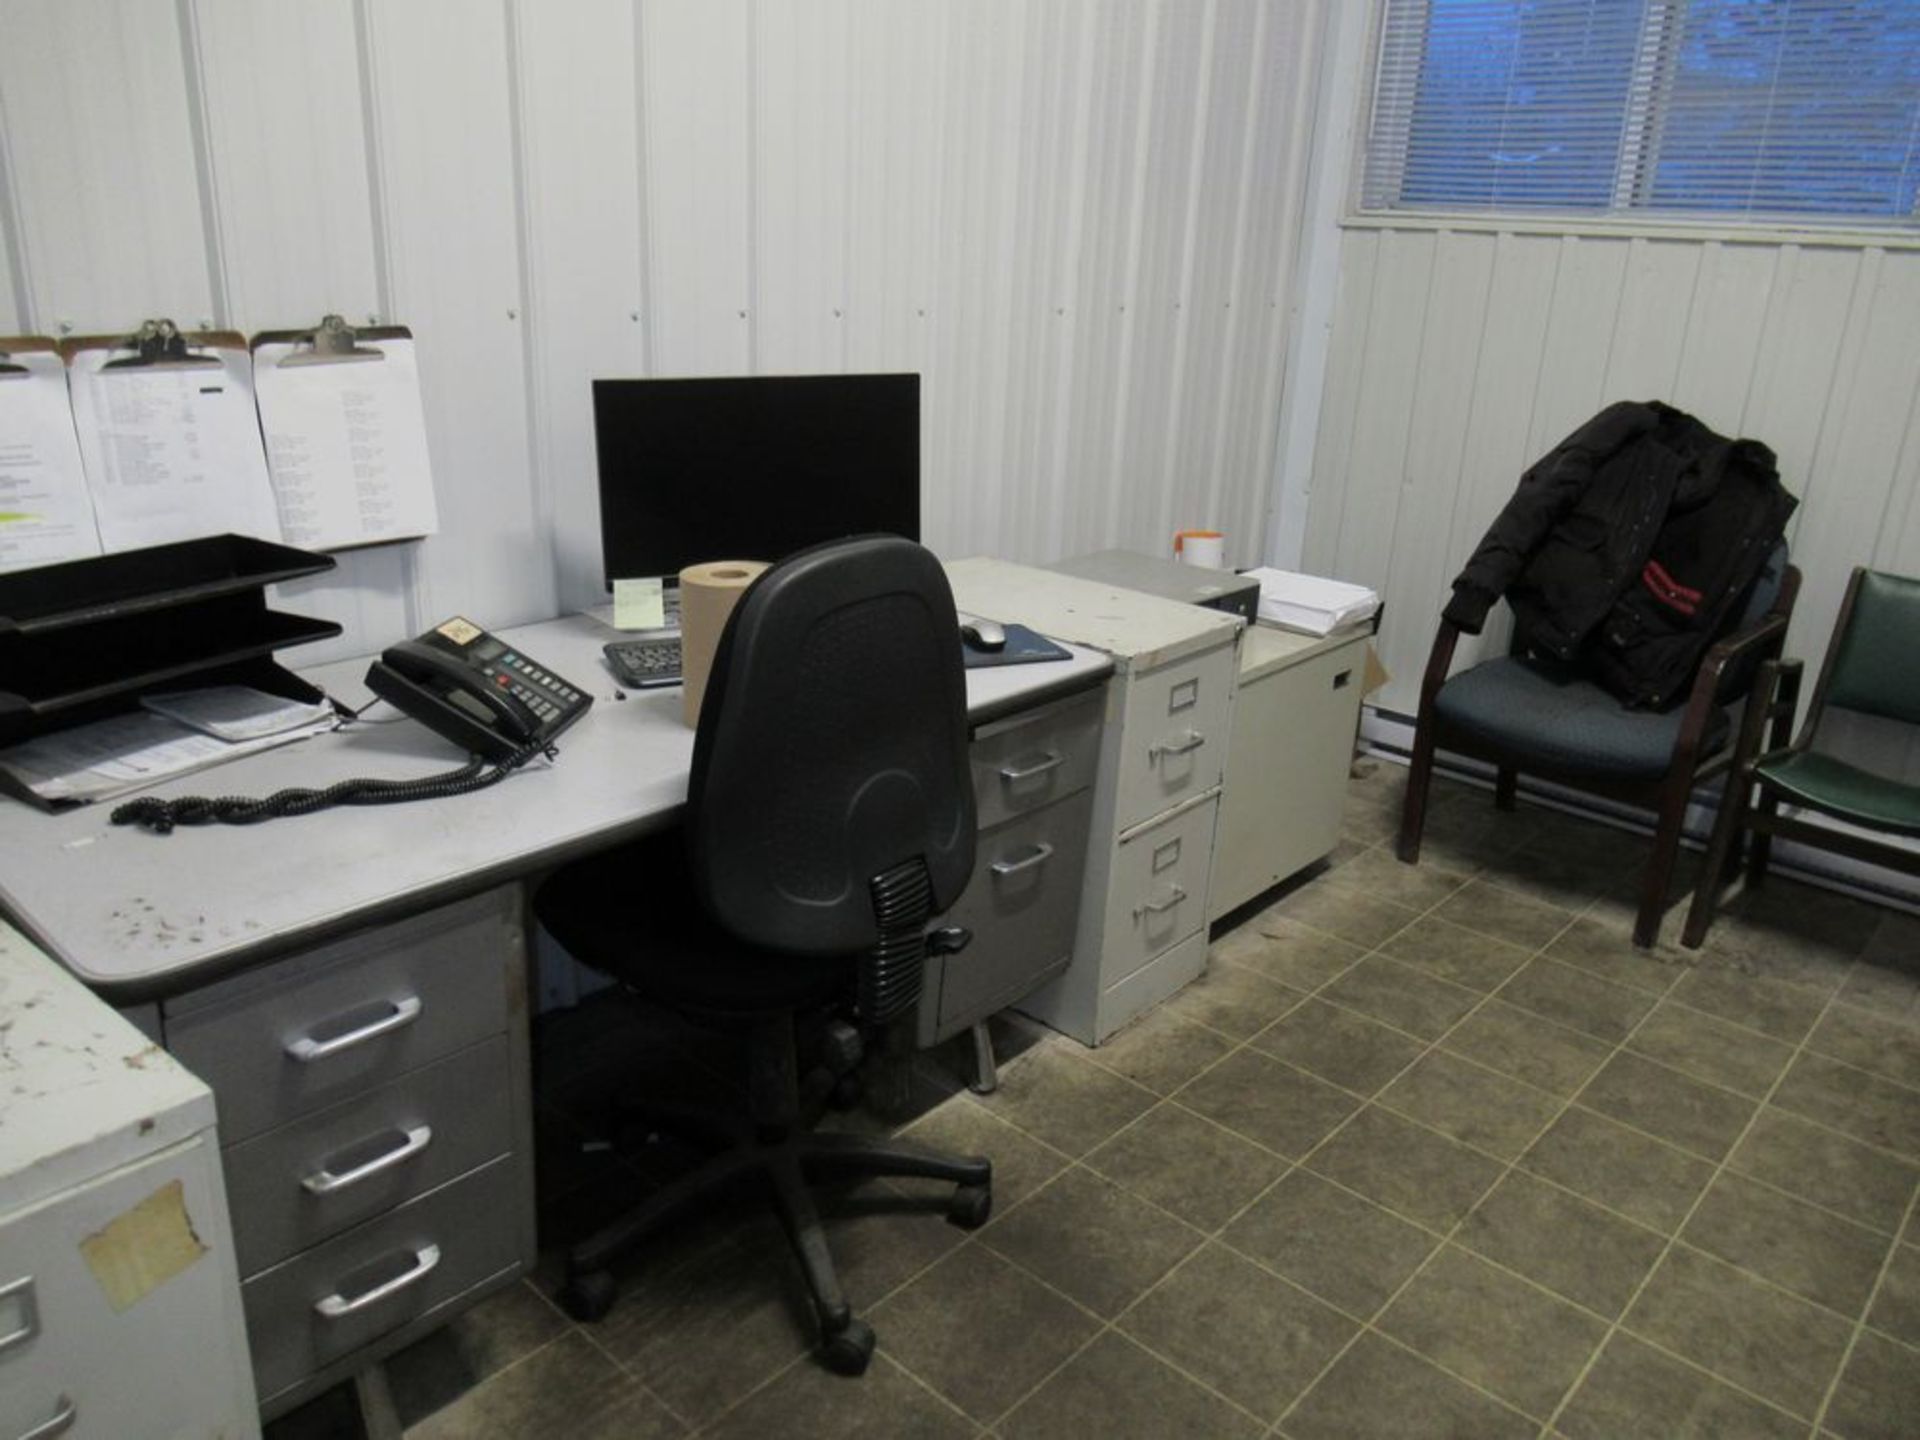 Contents Of Office Desk, Chairs, File Cabinets & Misc. - Image 2 of 2